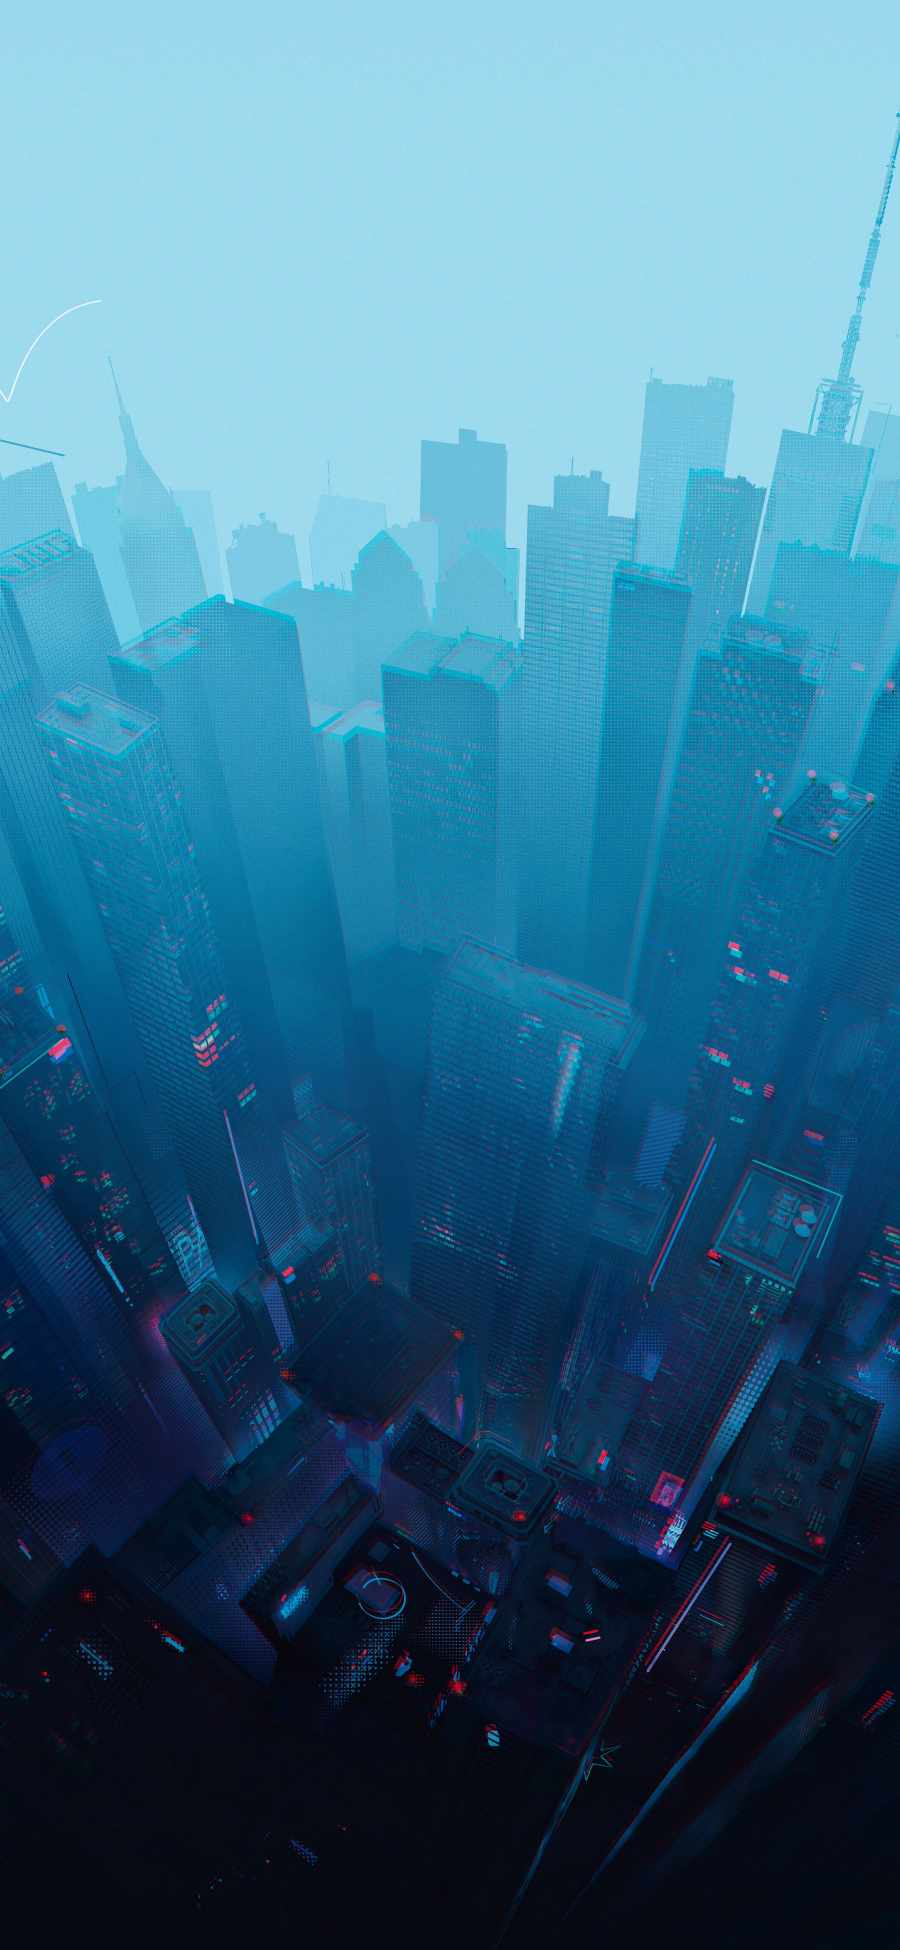 Glitch City IPhone Wallpaper  IPhone Wallpapers